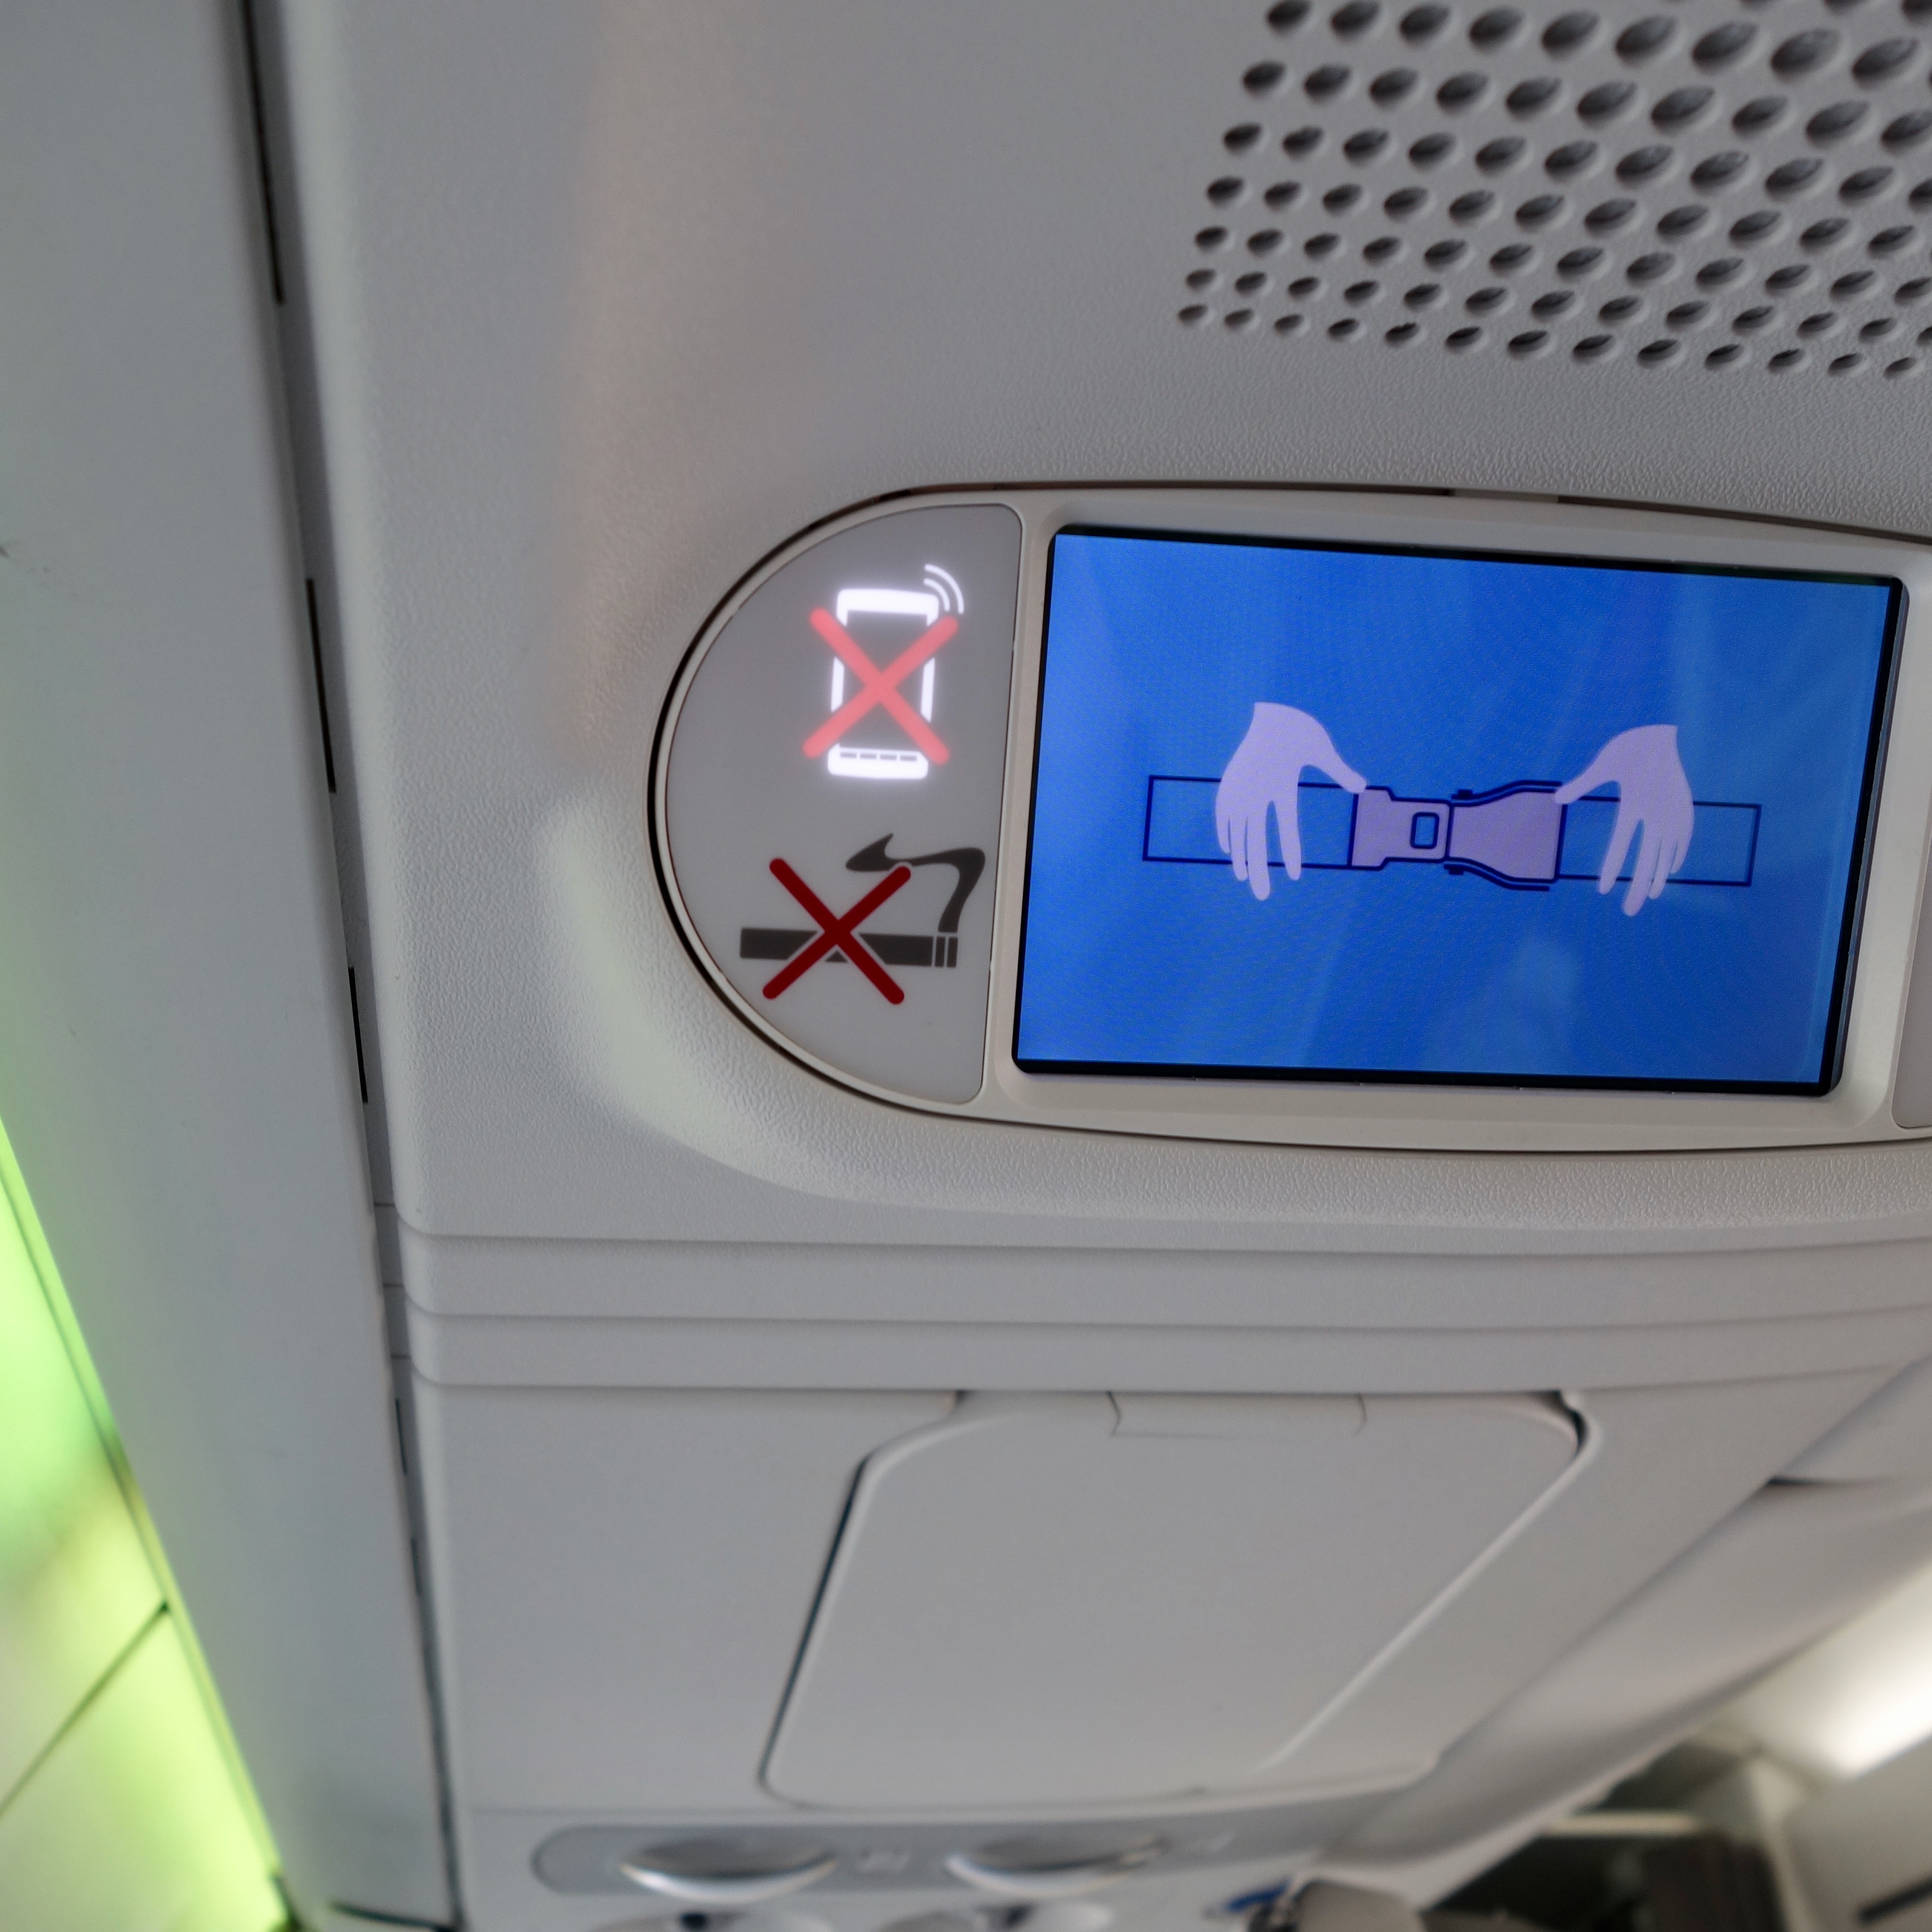 The Airbus A220 is a modern aircraft and this review reveals ipad sized screen behind each seat displaying in flight information, including safety features like this cartoon depicting buckling seatbelts, no smoking and no cell phones. 